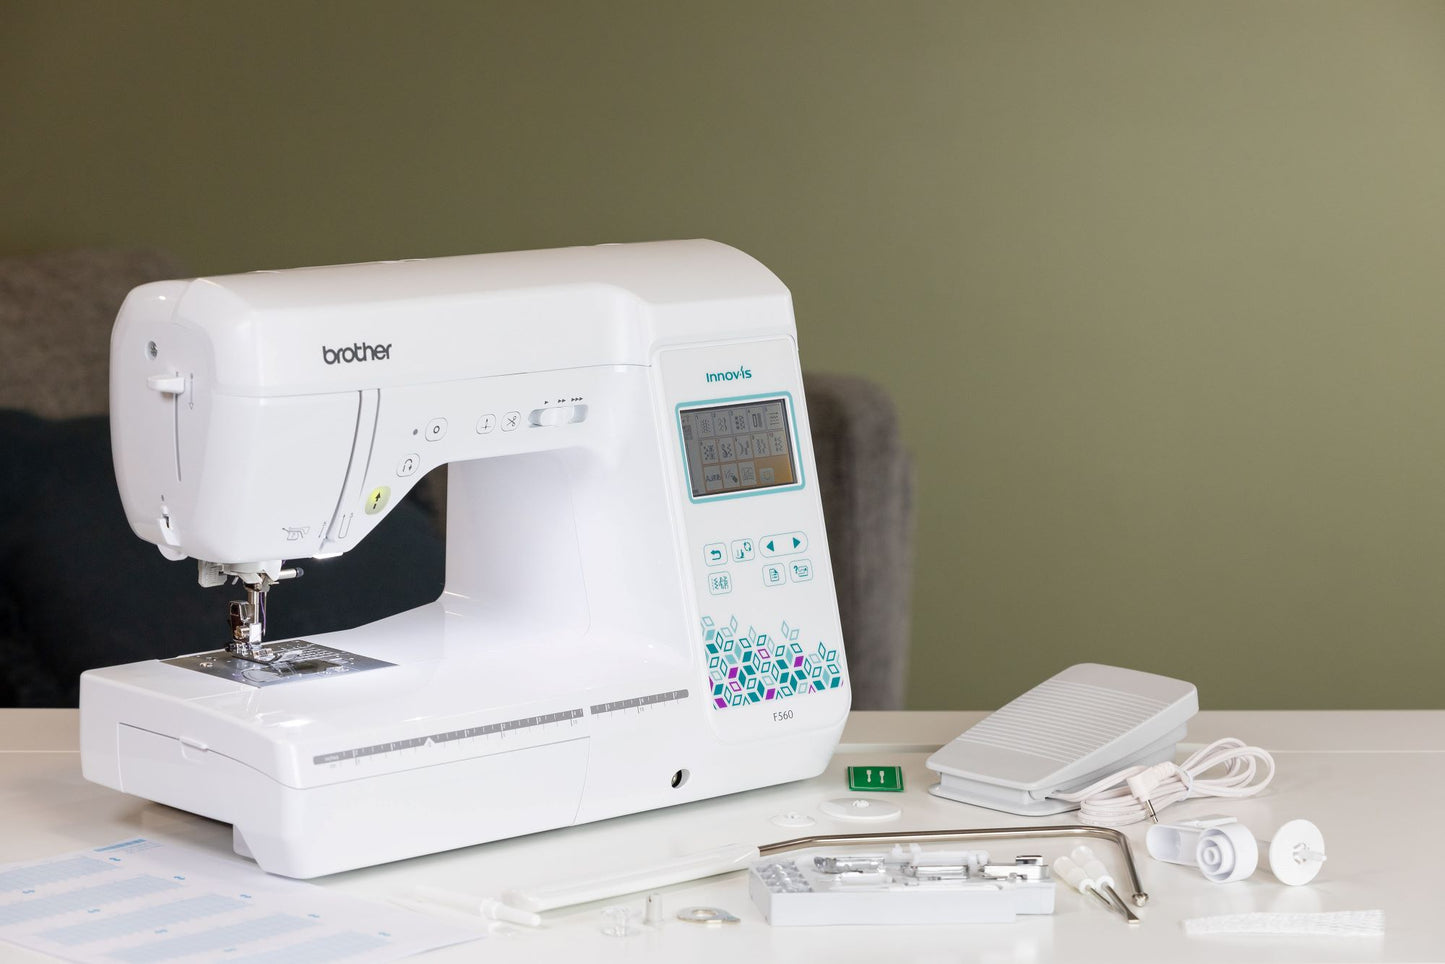 Brother Innovs F560 Sewing Machine OFFER